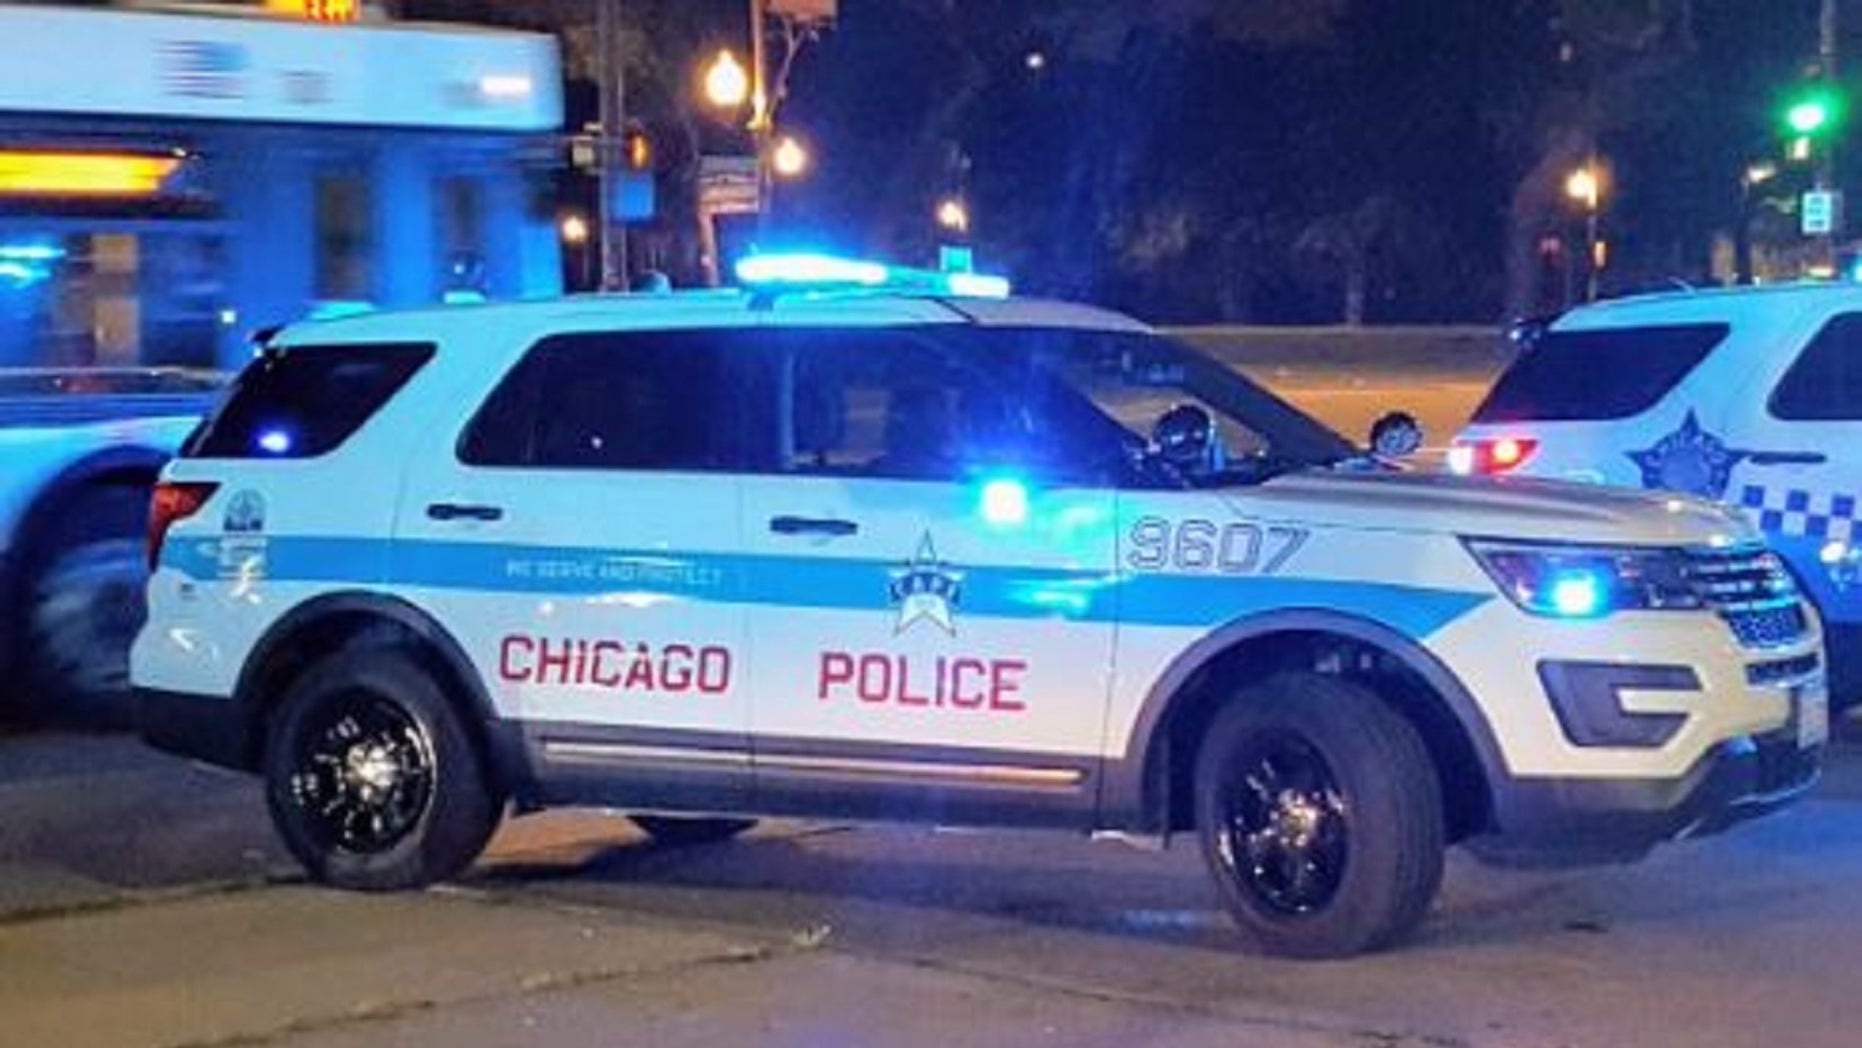 Off-duty Chicago police officer found fatally shot; no foul play suspected